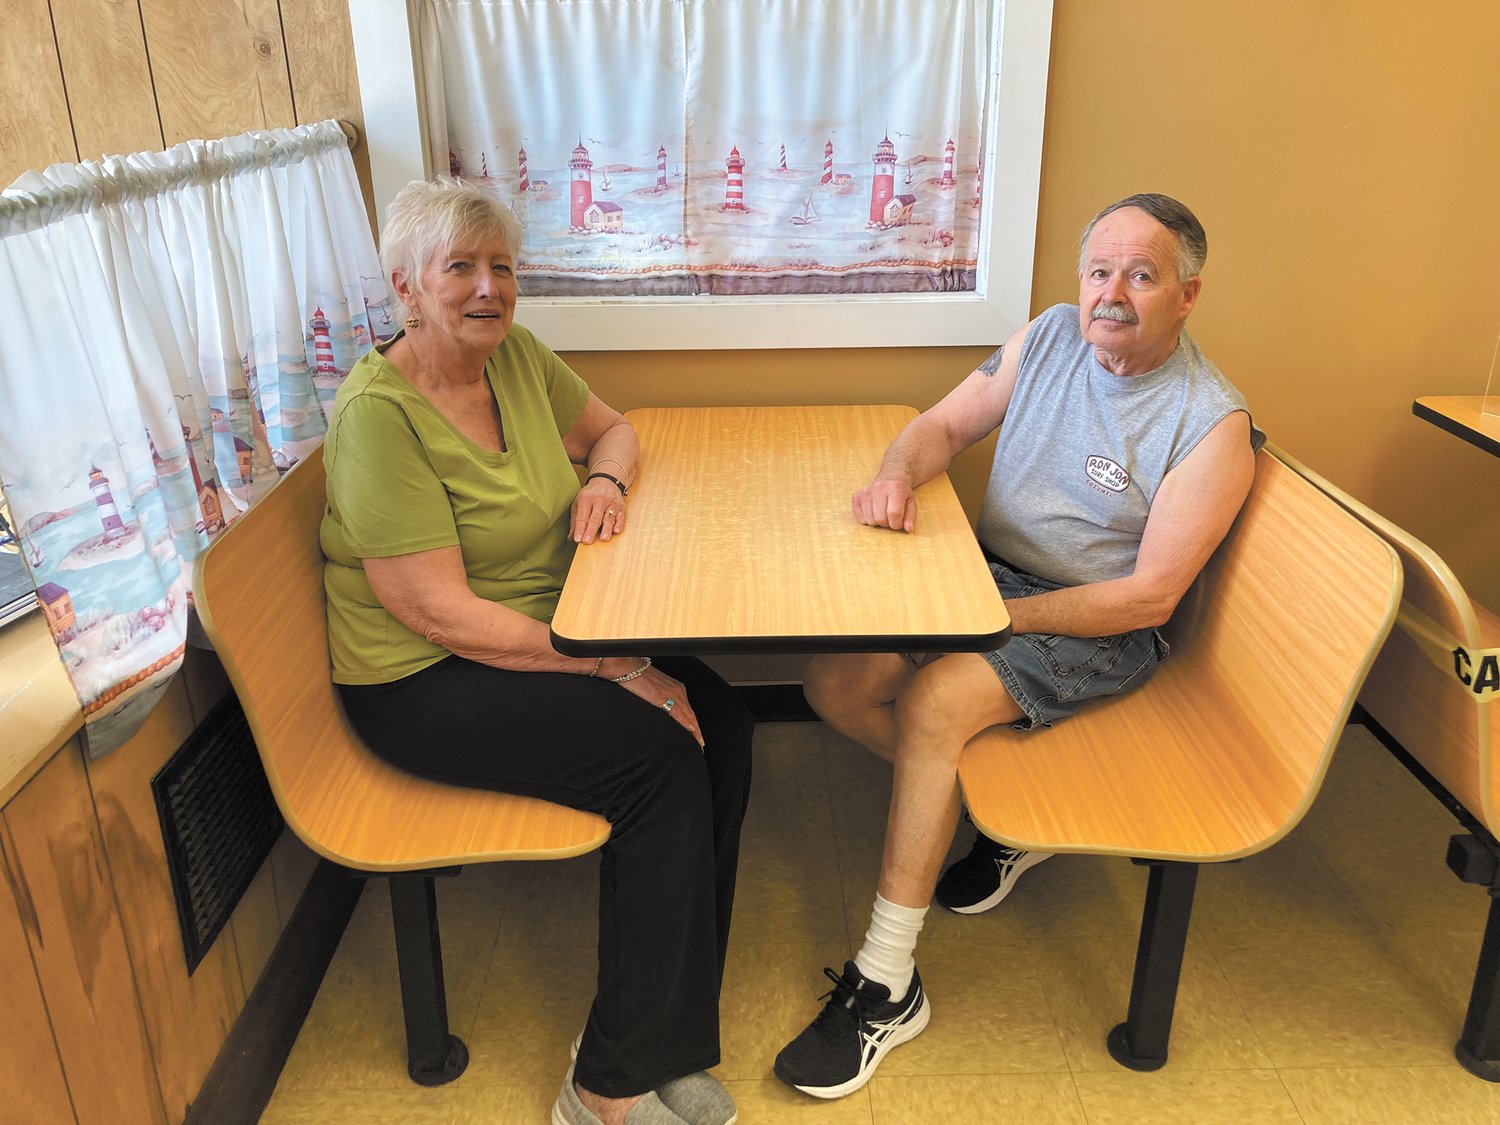 FINDING LOVE IN A RESTAURANT: Gary and Monique met at Stadium Fish and Chips. After six weeks of dating, they got married and have been together for 36 years.